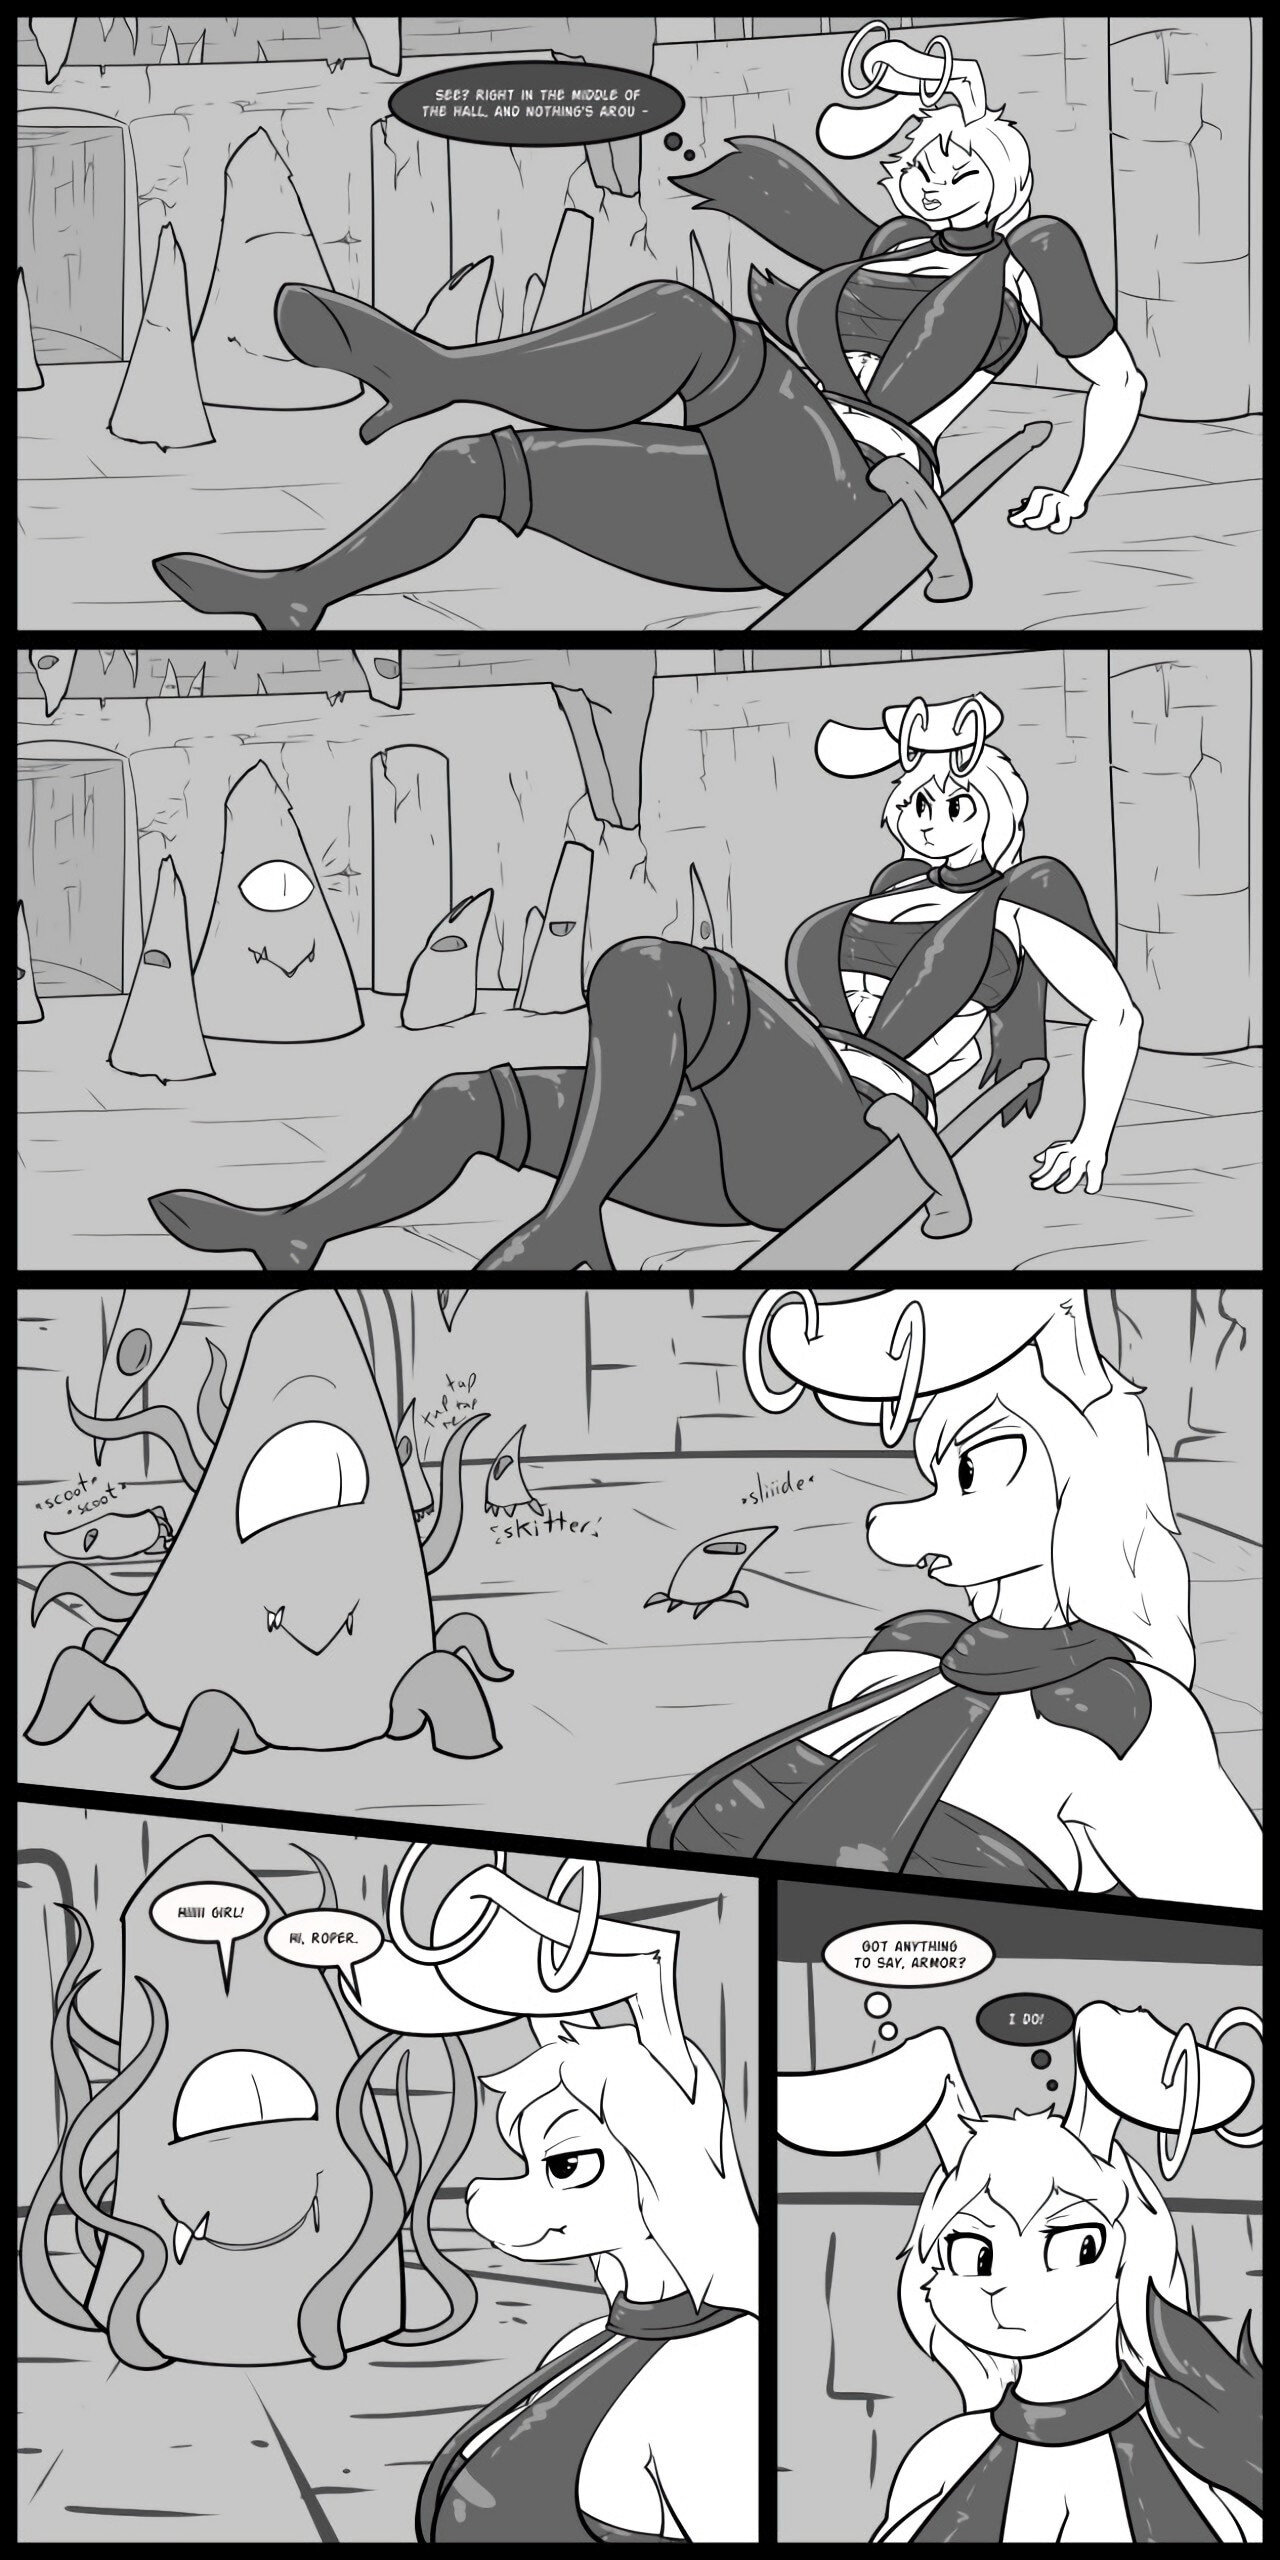 Rough Situation 2 - Page 4